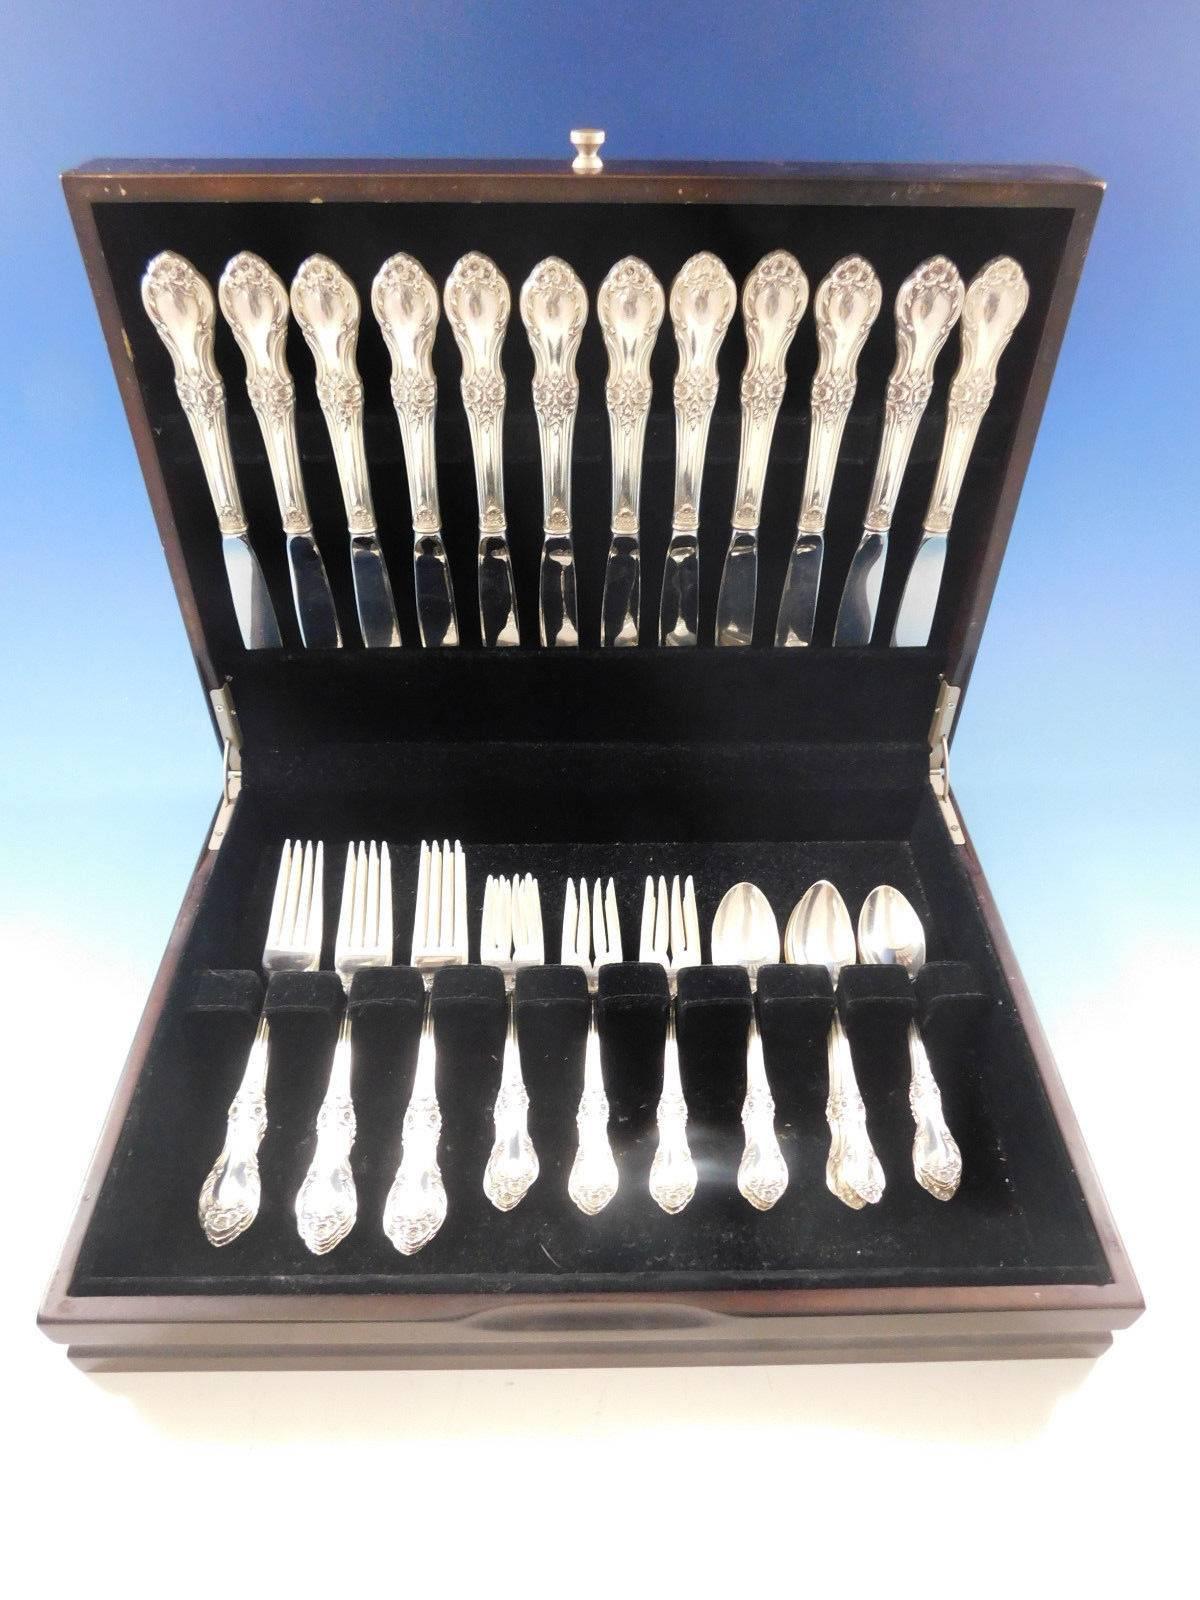 Grand Colonial by Wallace sterling silver Flatware set, 48 pieces. This set includes:

12 Knives, 8 3/4